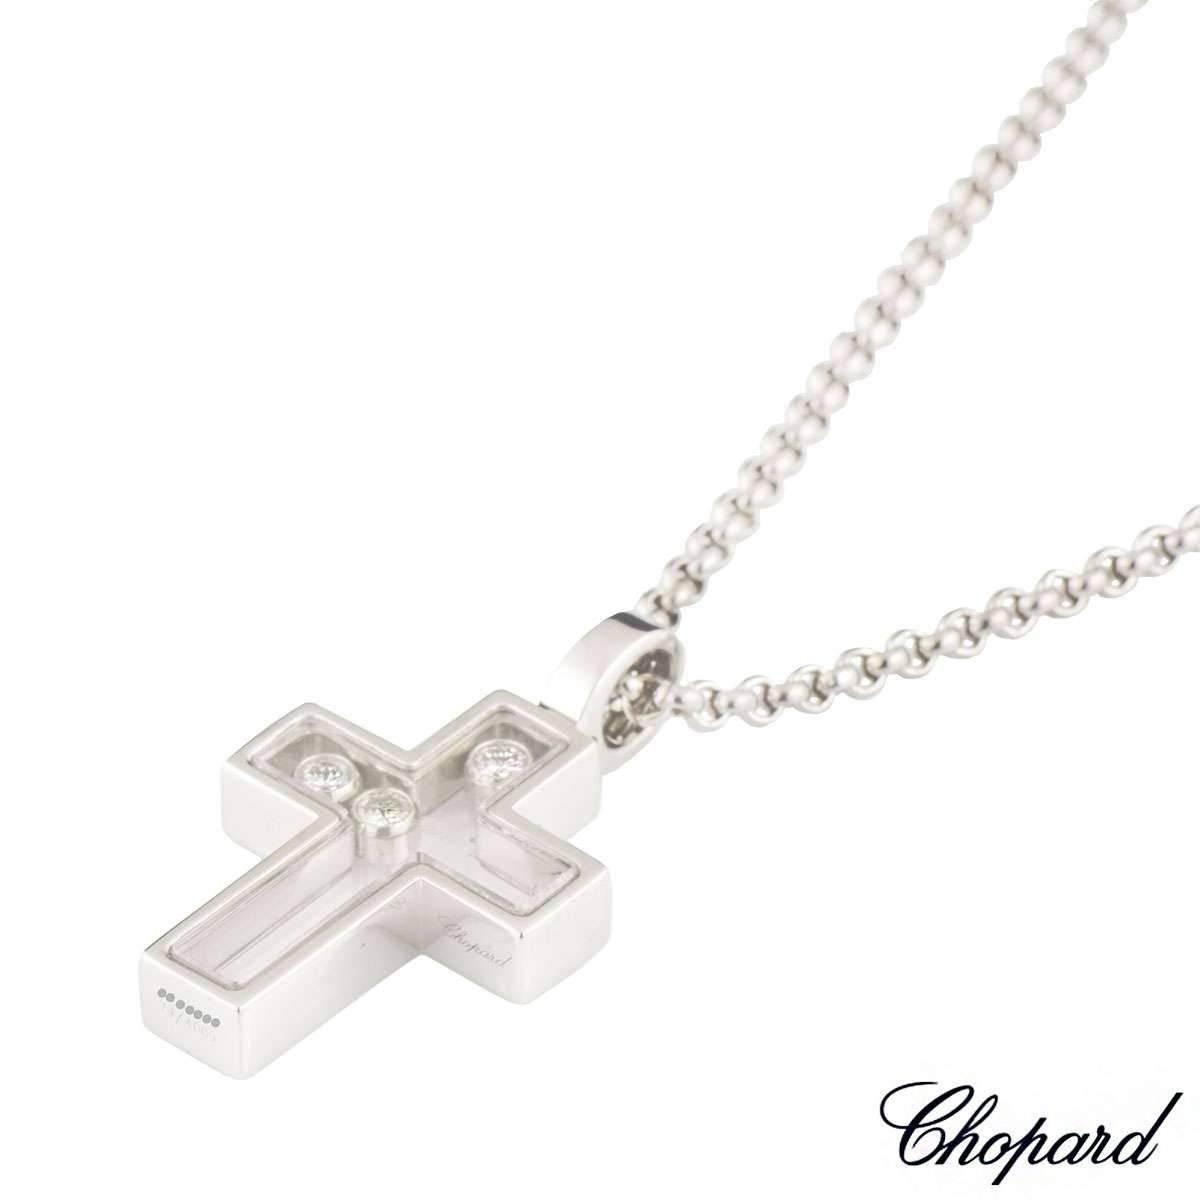 An 18k white gold cross pendant from the Happy Diamonds collection by Chopard. The cross encloses 3 round brilliant cut diamonds totalling 0.17ct in between 2 panels of glass. The cross measures 1.5cm in width and 2.7cm in height including the bale.